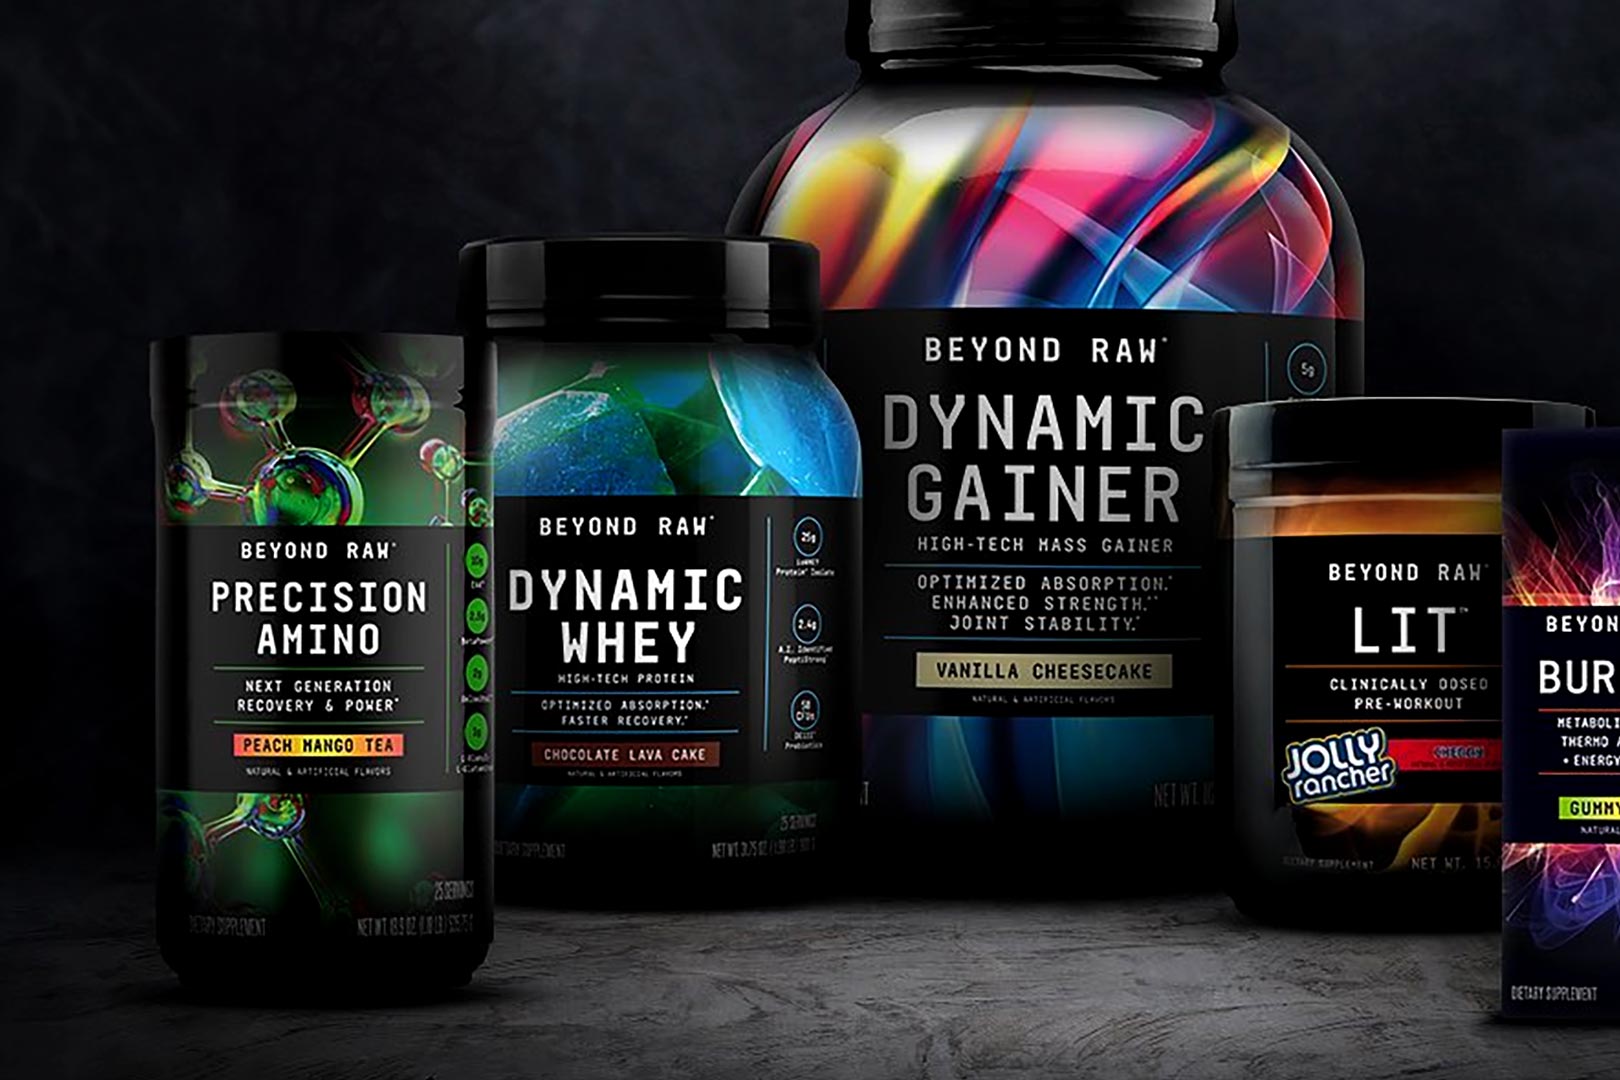 Gnc Live Well Sale For Beyond Raw